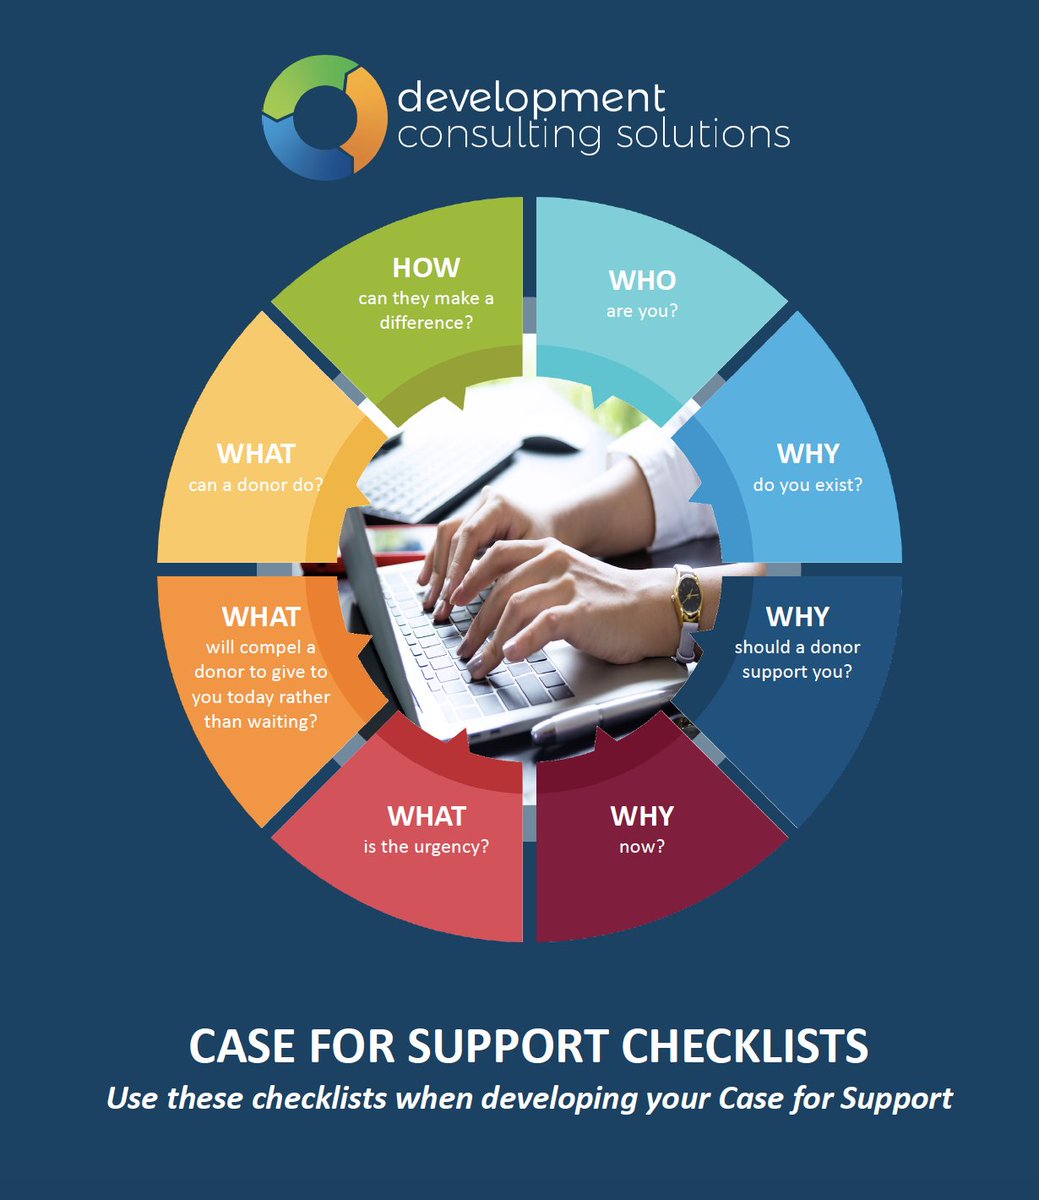 Your FREE Case for Support Checklists!

Your MUST-HAVE checklists when crafting your organization's Case for Support.
…opmentconsultingsolutions.ac-page.com/caseforsupport…

#coaching #nonprofit #fundraising #fundraisingideas #charityfundraiser